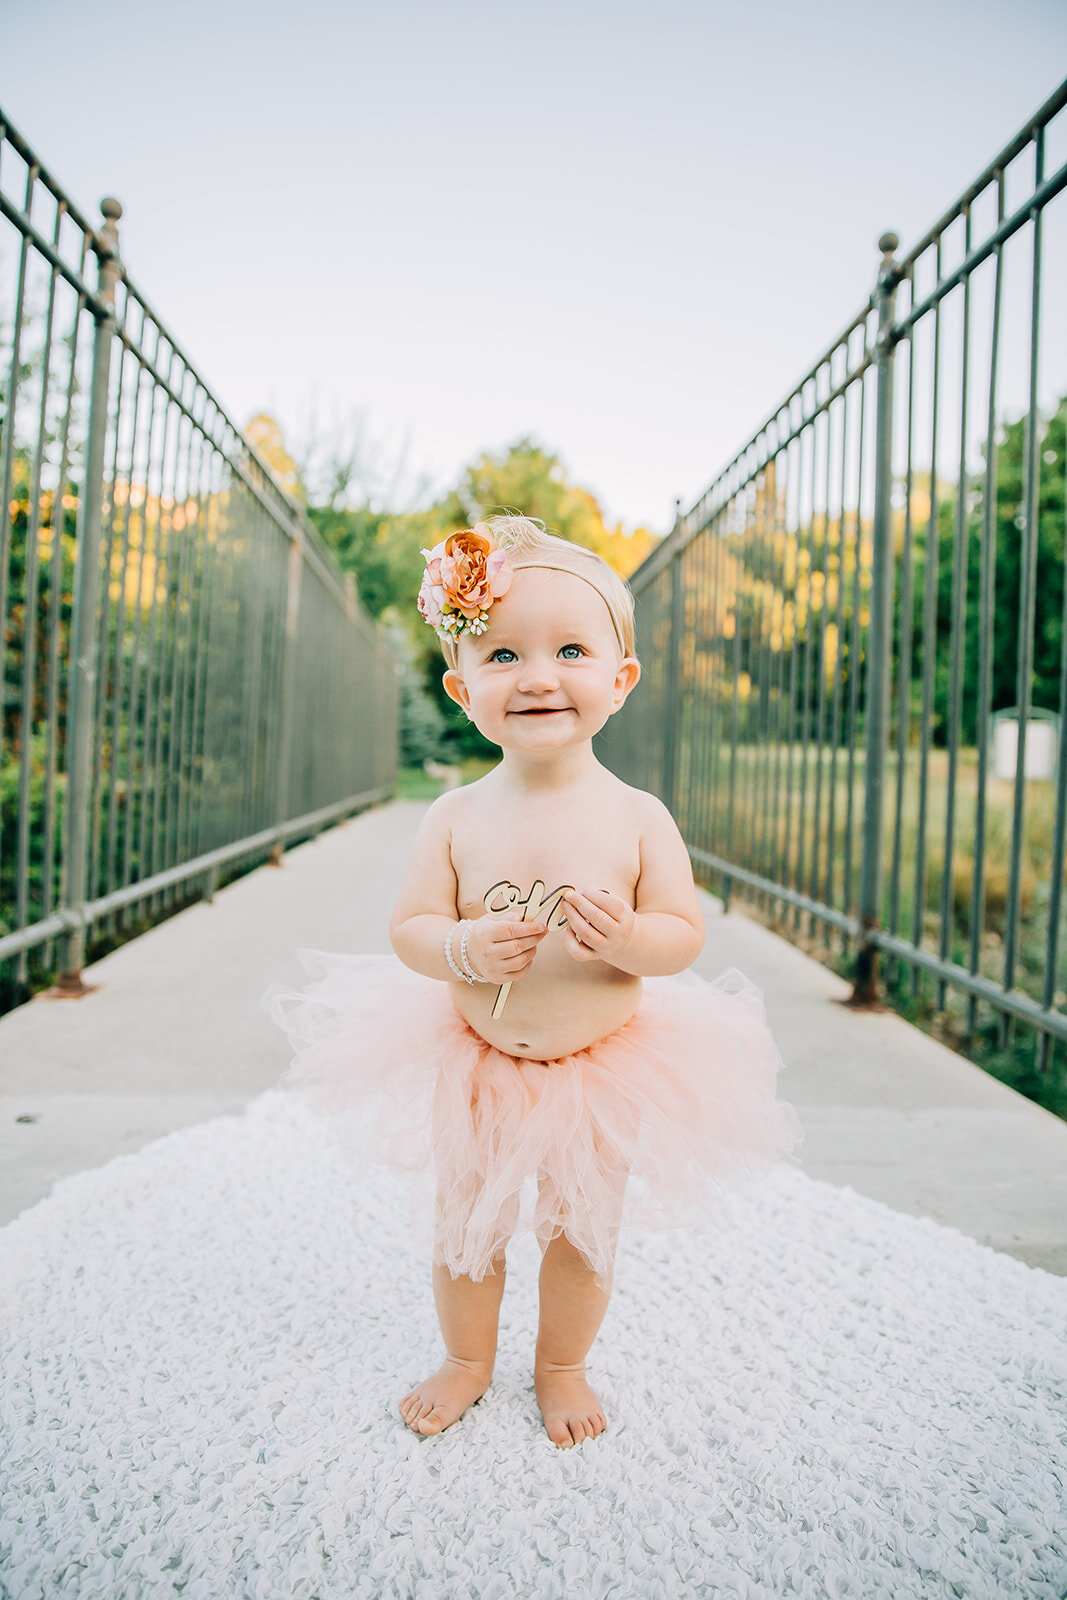  kids photography standing on a blanket baby prop ideas birthday shoot wooden props hand held props baby dancer outfit inspo floral headband inspo what to wear to birthday shoot first birthday smiling girl cute baby cache valley photographer Denzil S